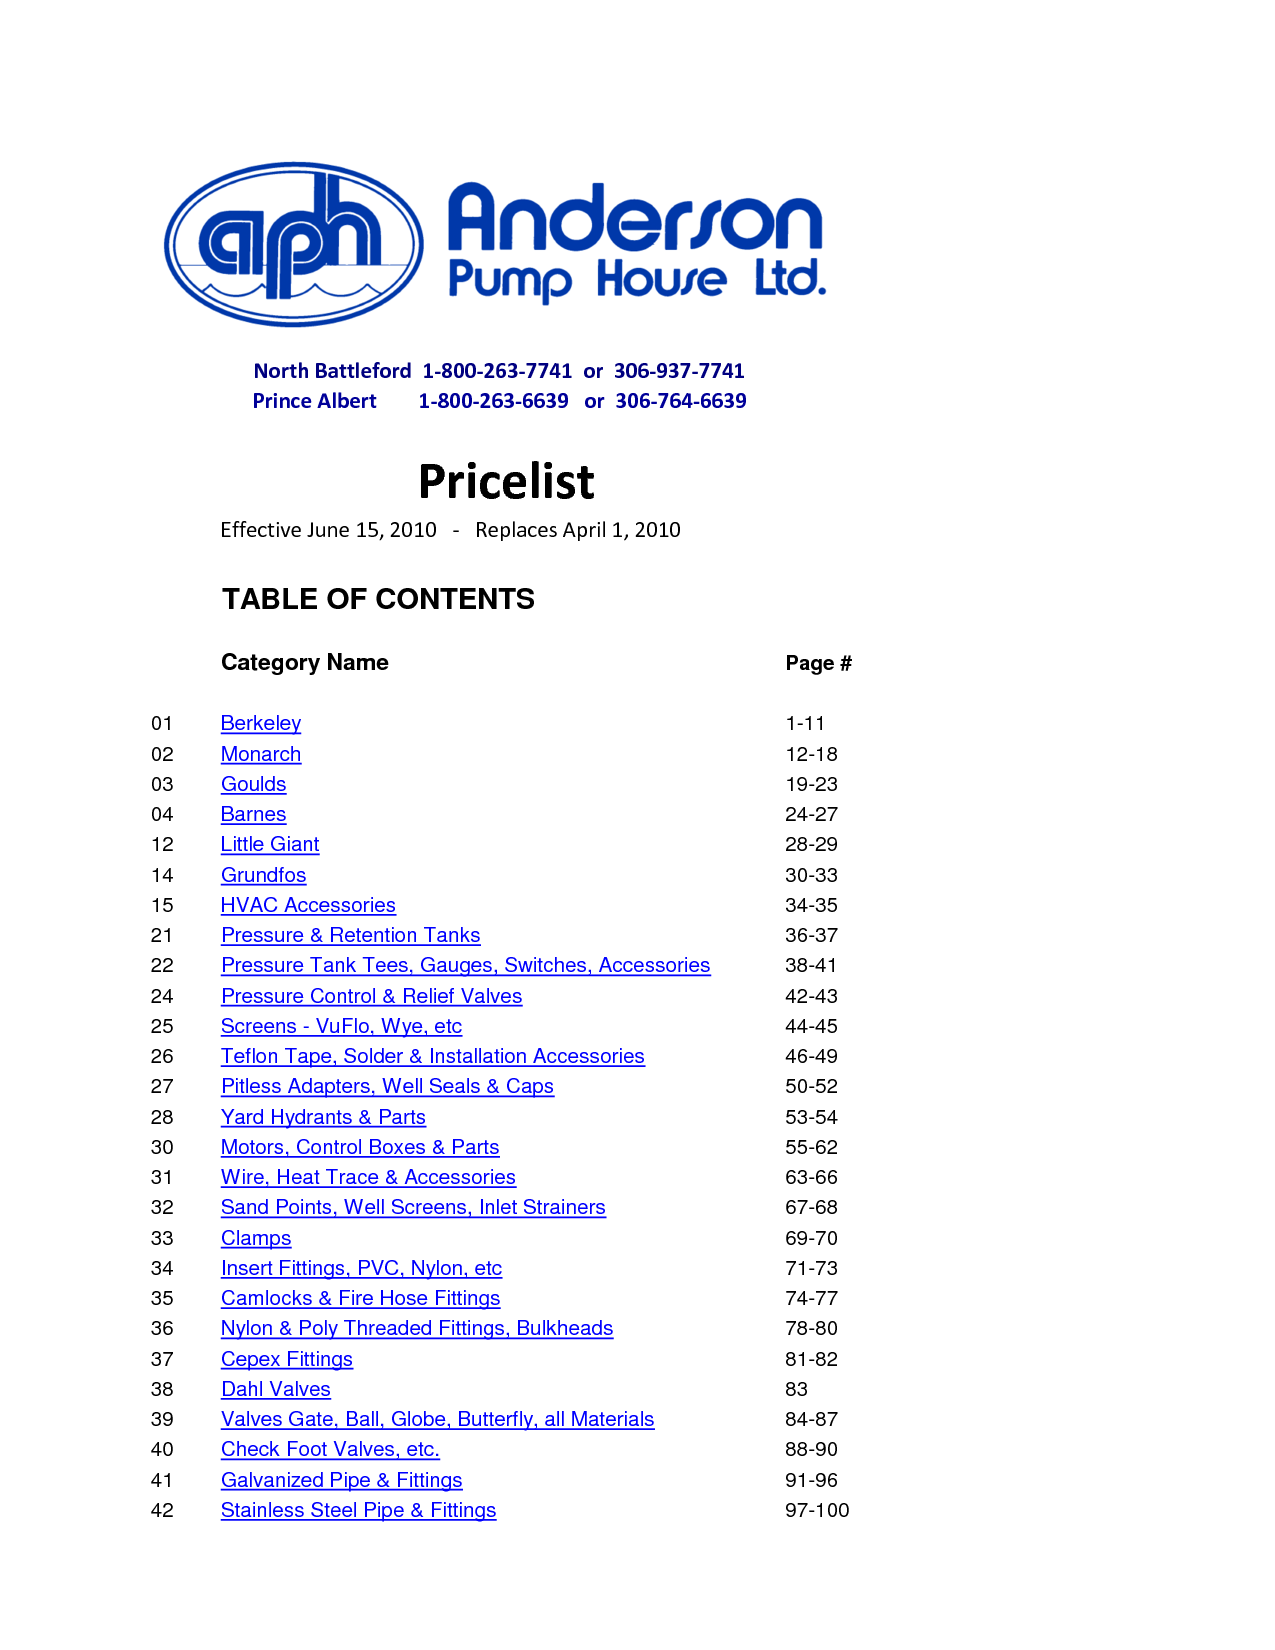 Table of Contents - Anderson Pump House Ltd.